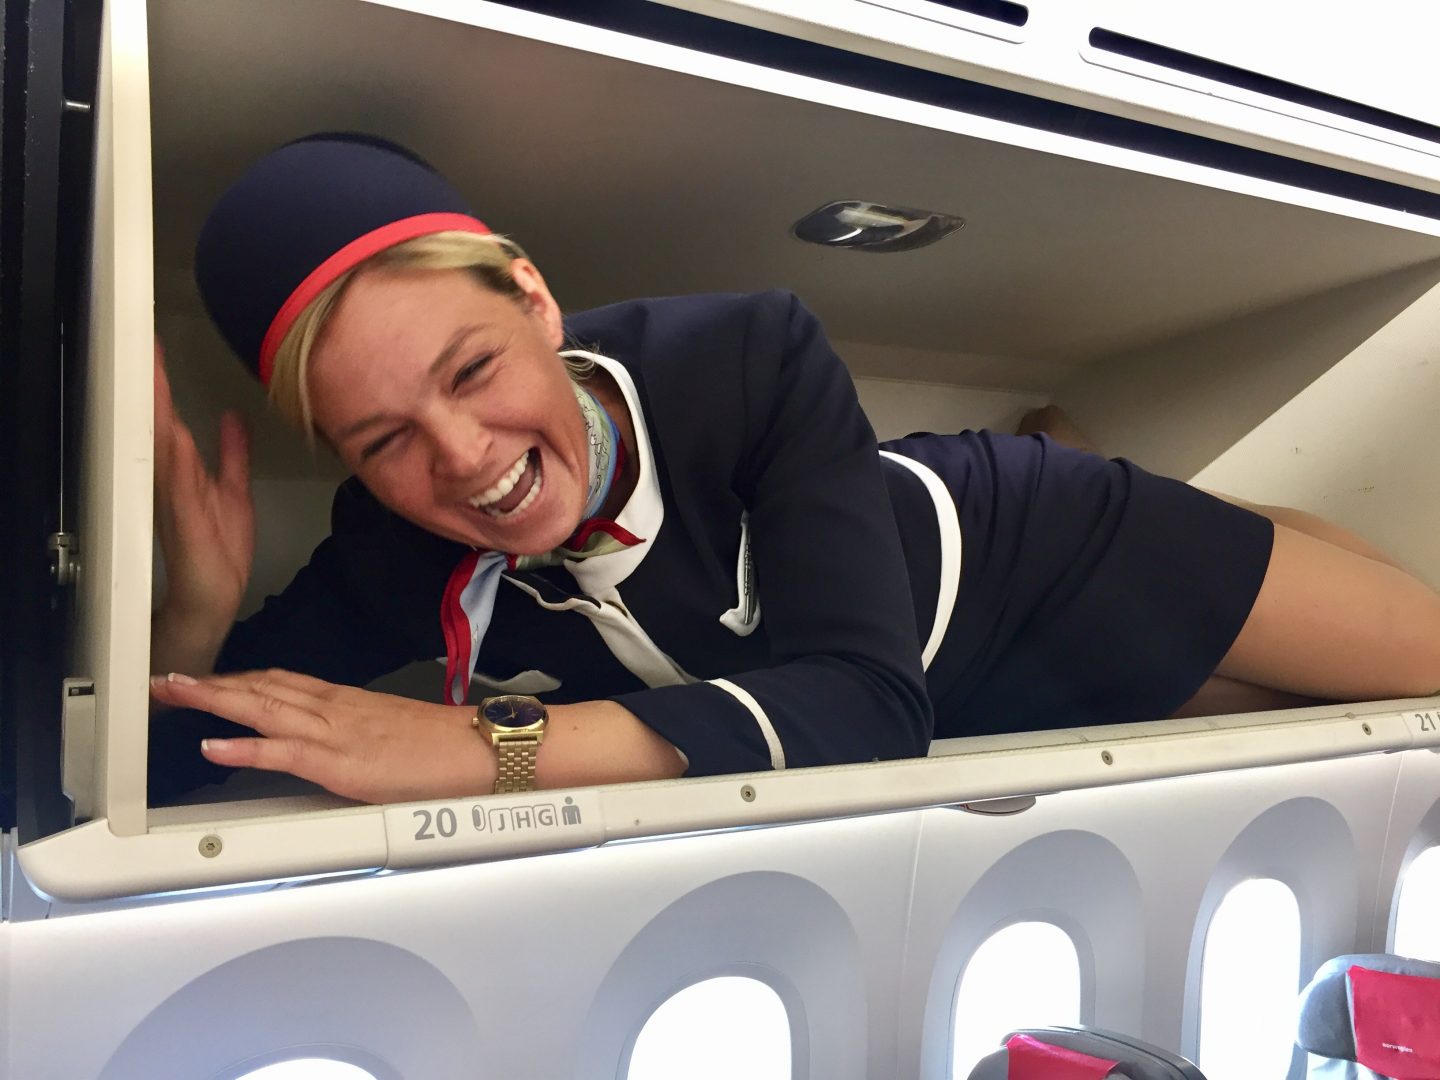 "No Middle Runway" Why A Career As A Flight Attendant Is A Bad Idea If